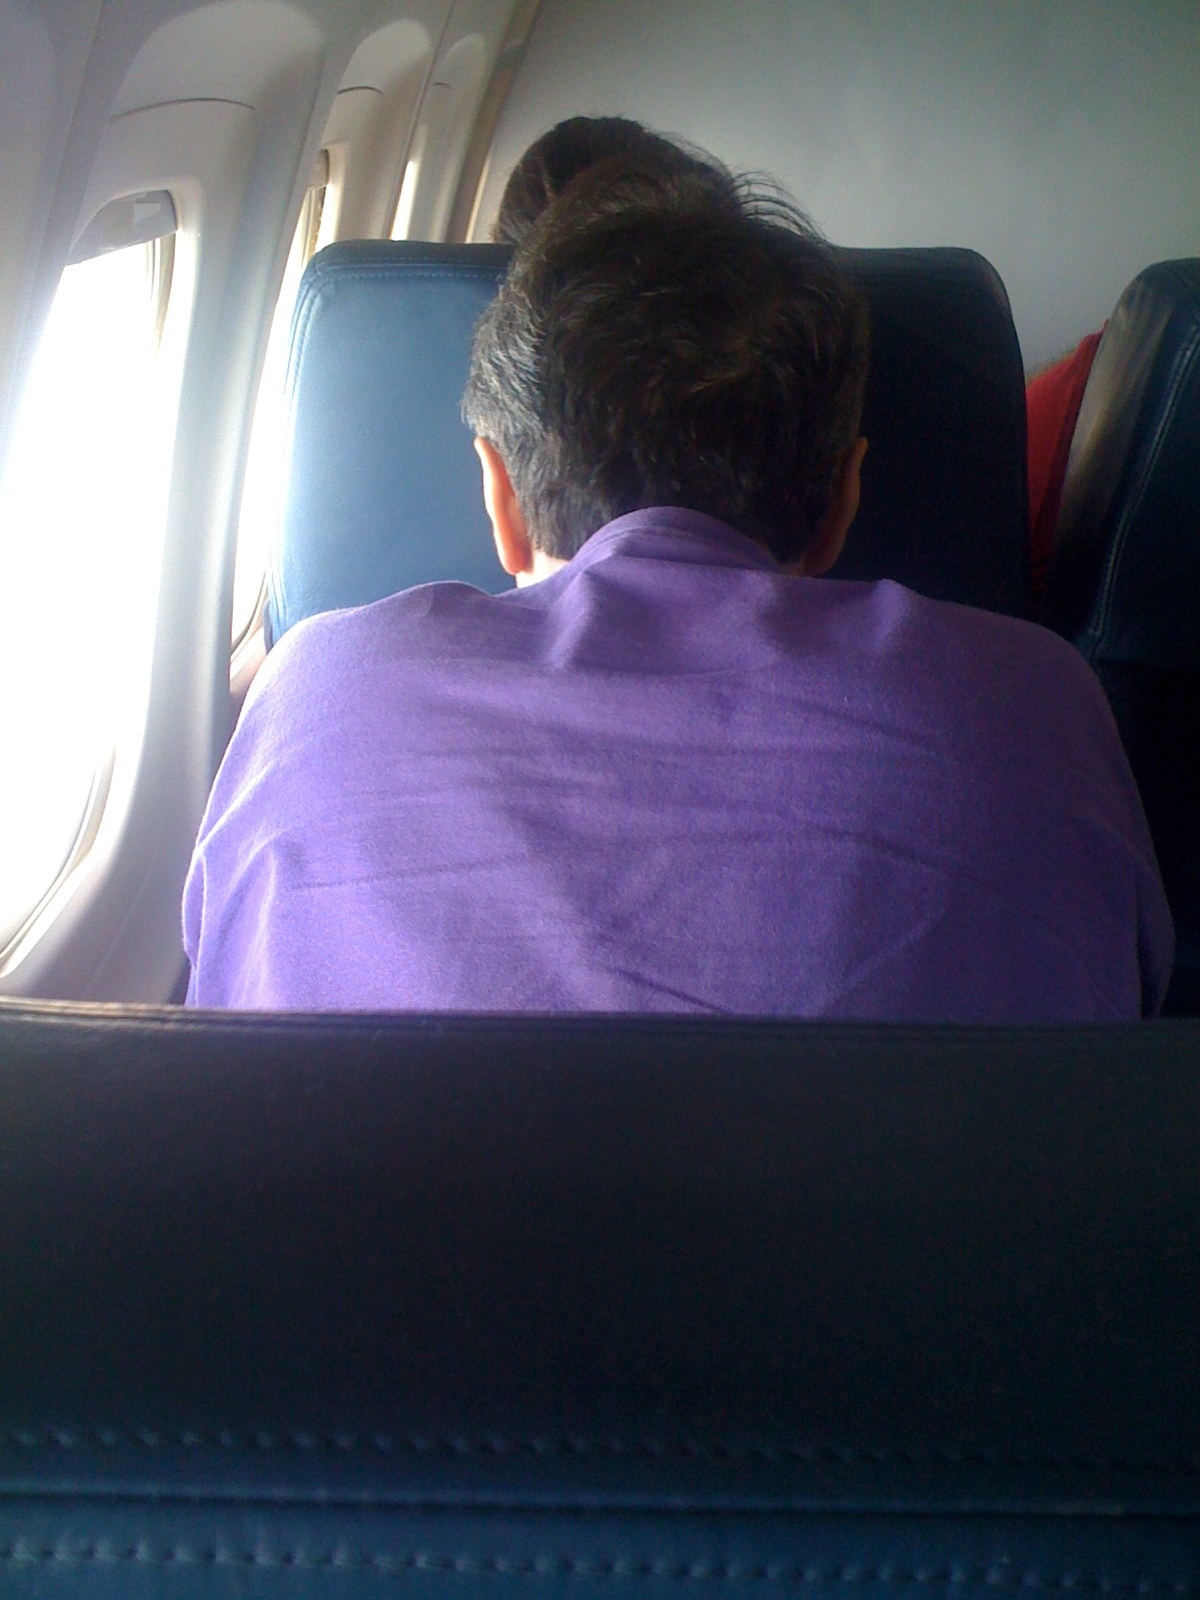 The back of someone leaning forward in their airplane seat